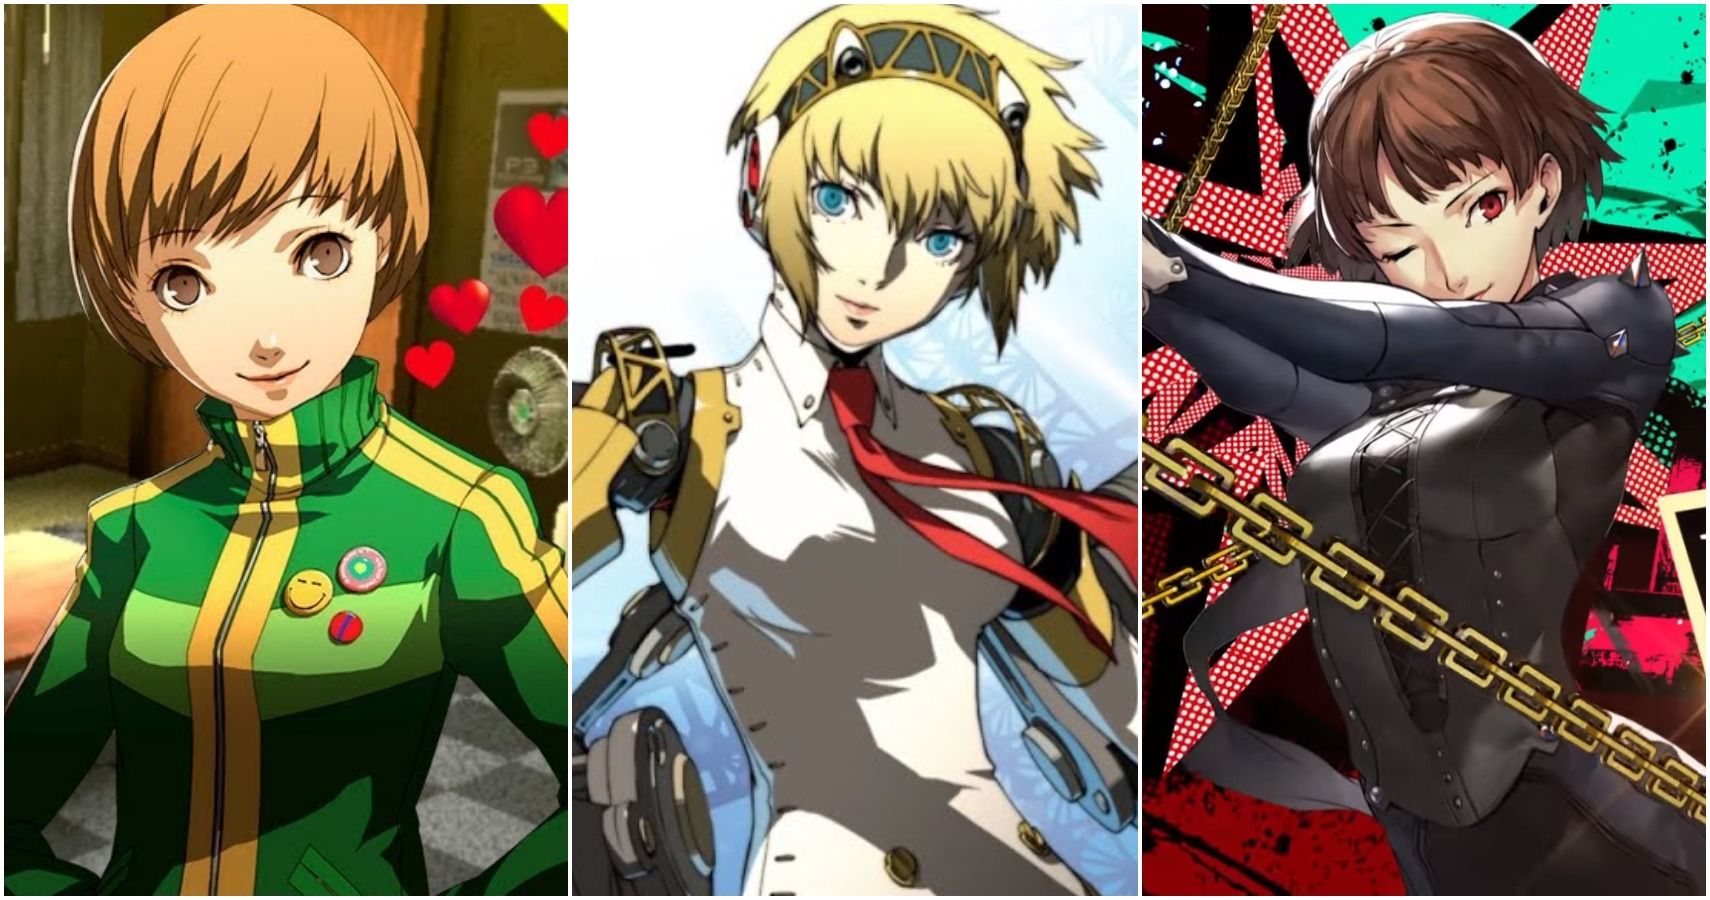 Persona JRPG series: 10 amazing facts